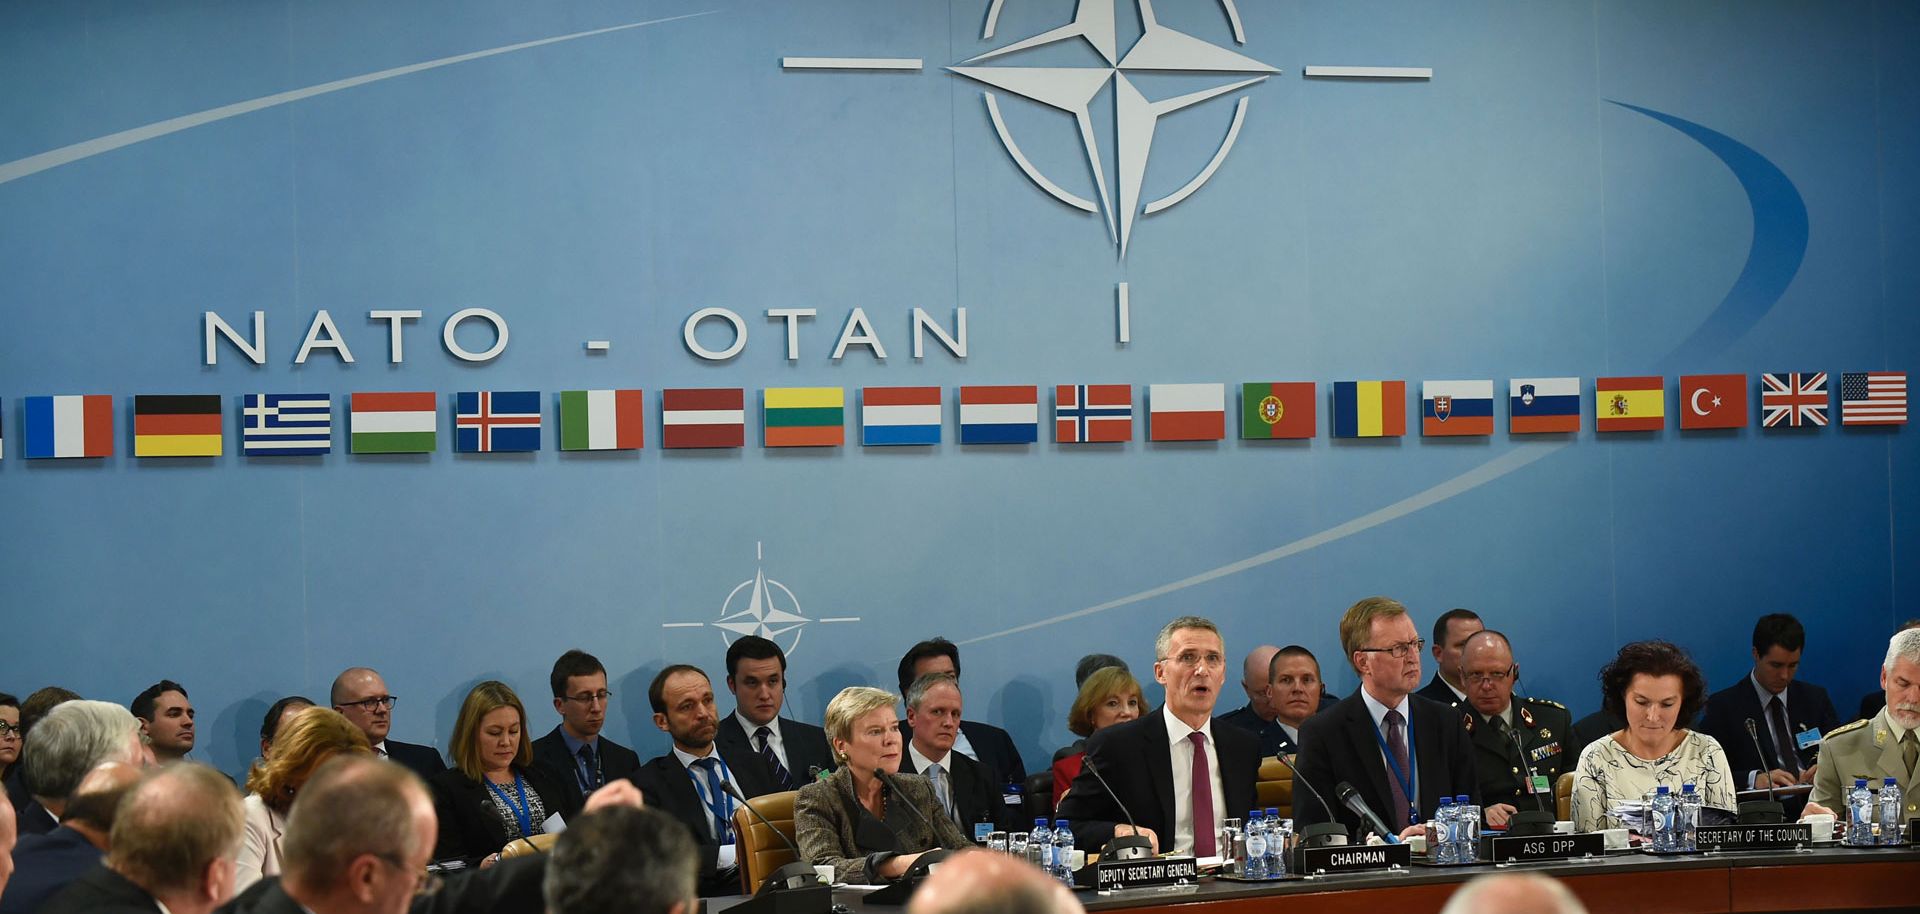 In part 3 of this series on the North Atlantic Treaty Organization, NATO Secretary-General Jens Stoltenberg speaks at a NATO Defense ministers' meeting at the NATO headquarters in Brussels on October 26, 2016. 